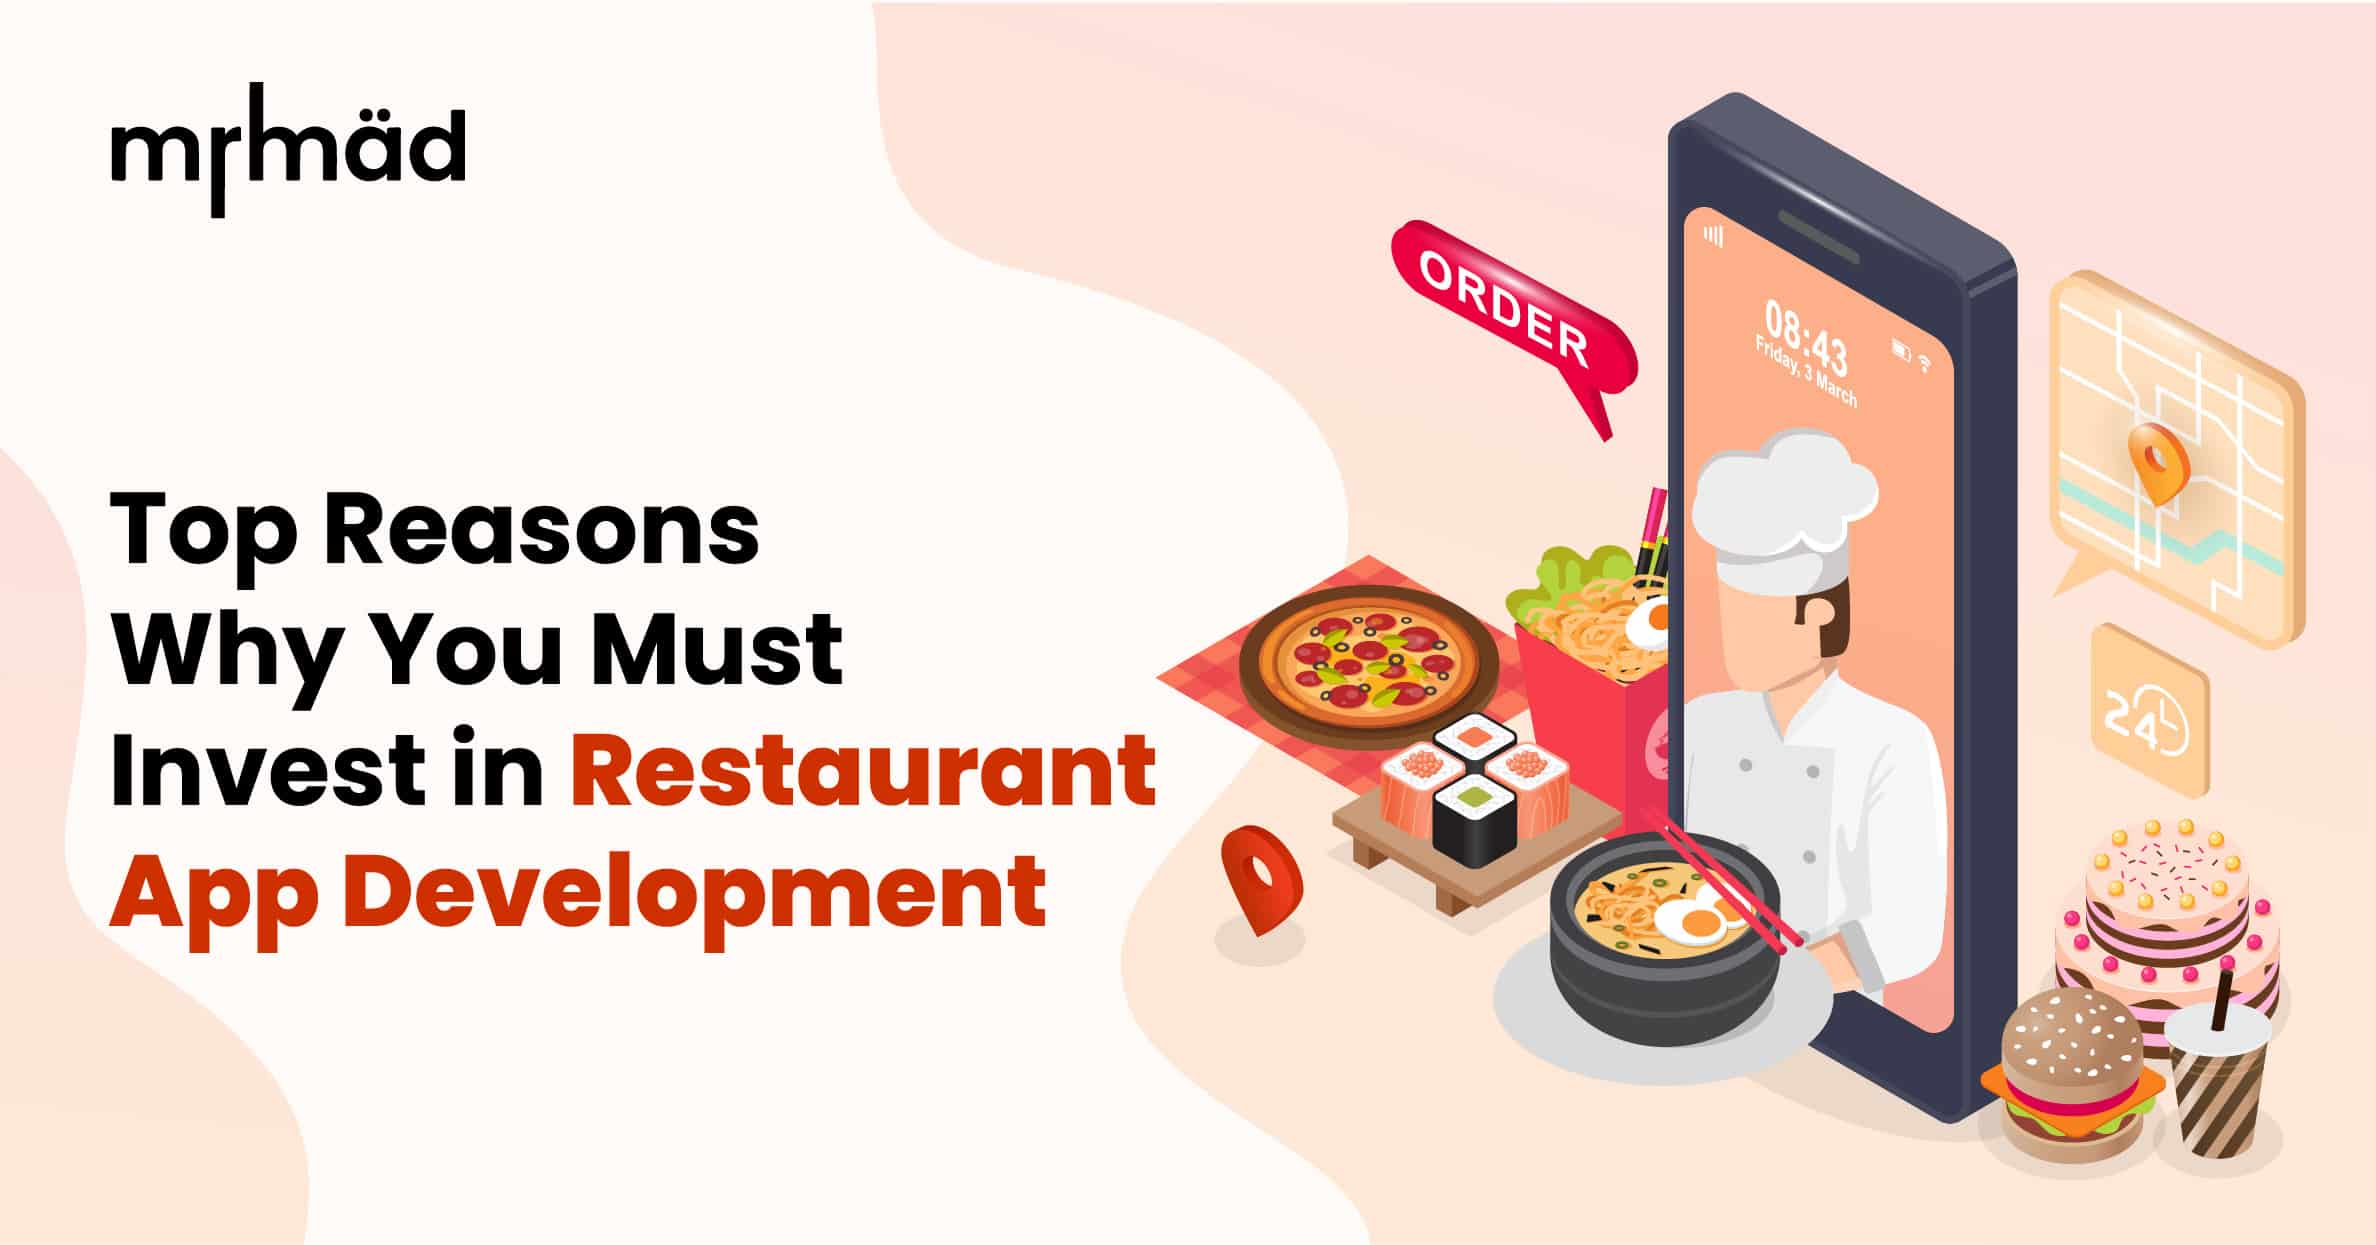 Top Reasons Why You Must Invest in Restaurant App Development